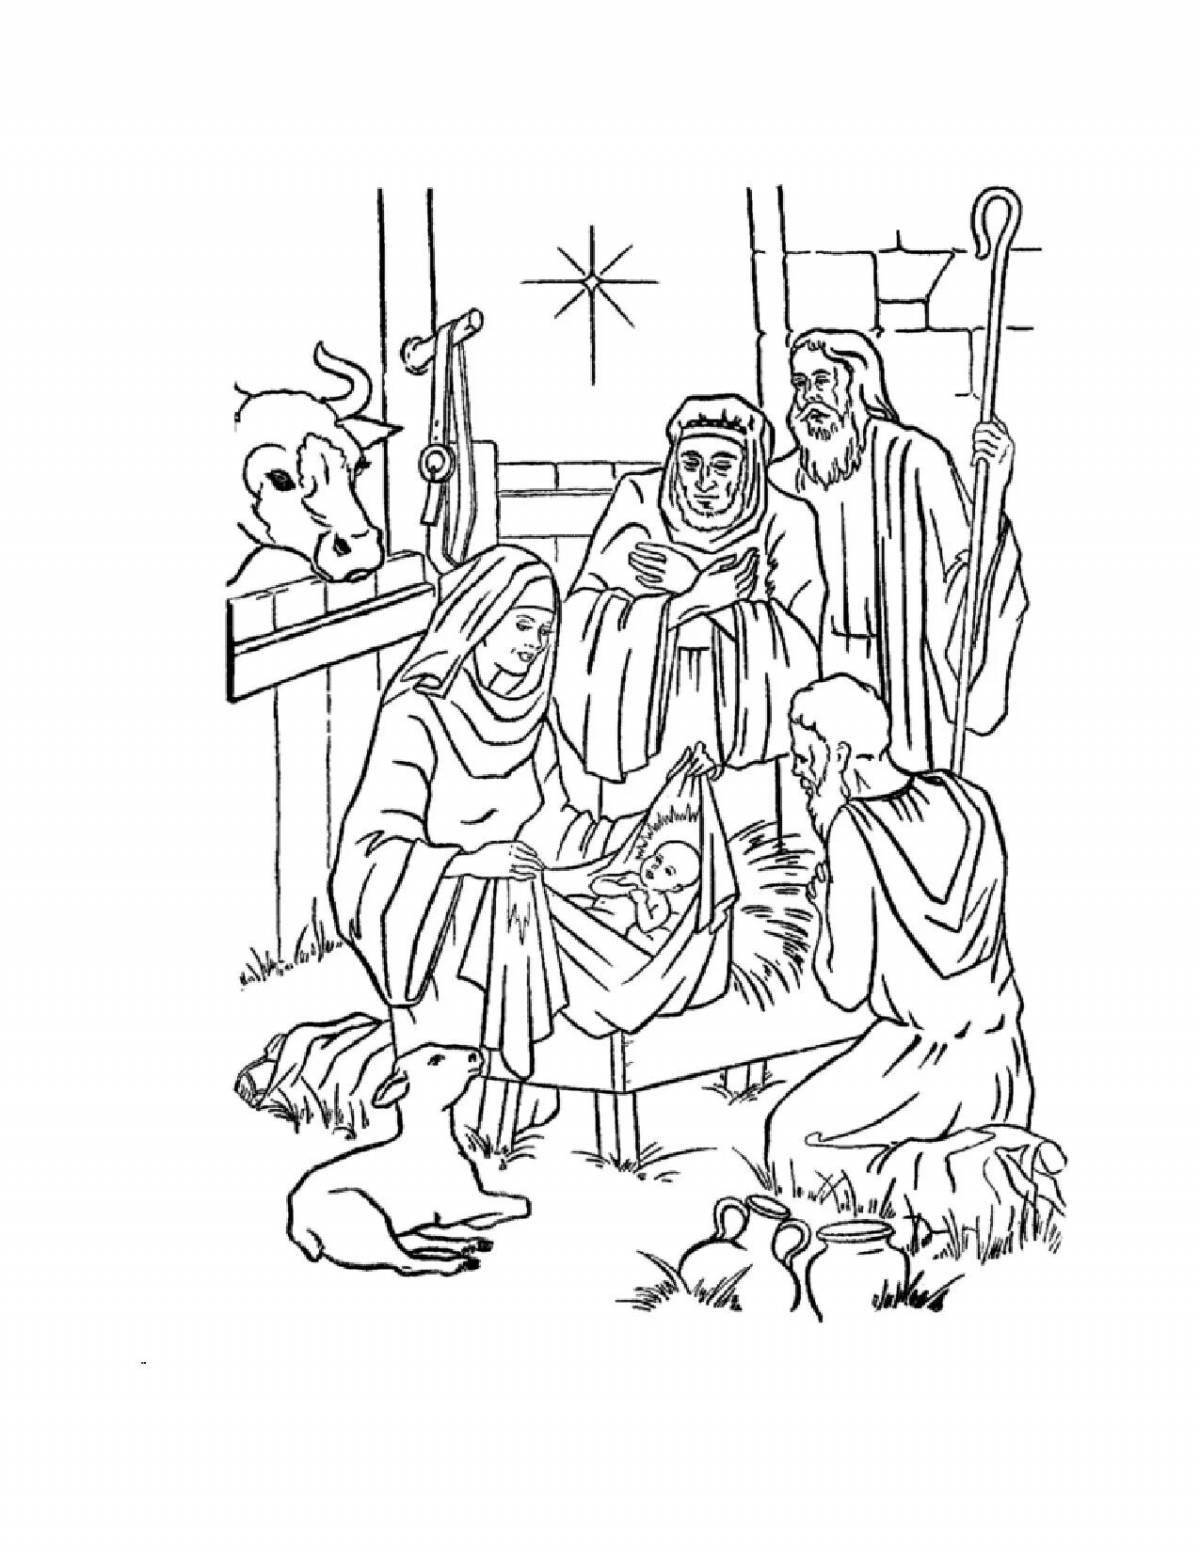 Coloring page jesus in the manger by a lucky chance